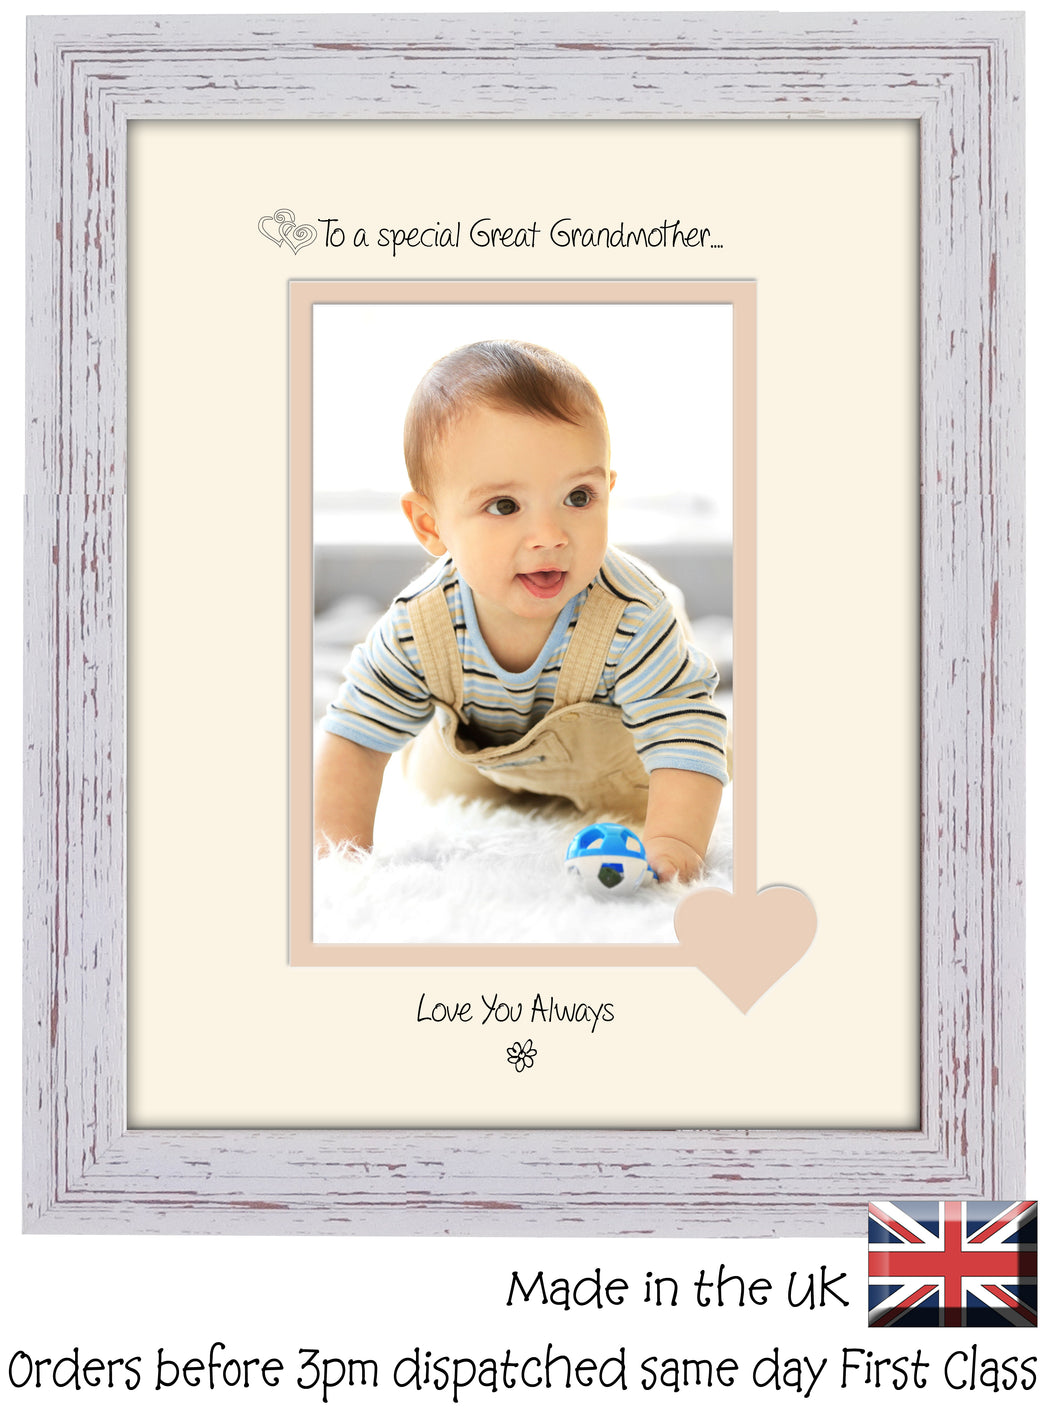 Great Grandmother Photo Frame - To a Special Great Grandmother ... Love you Always Portrait photo frame 6